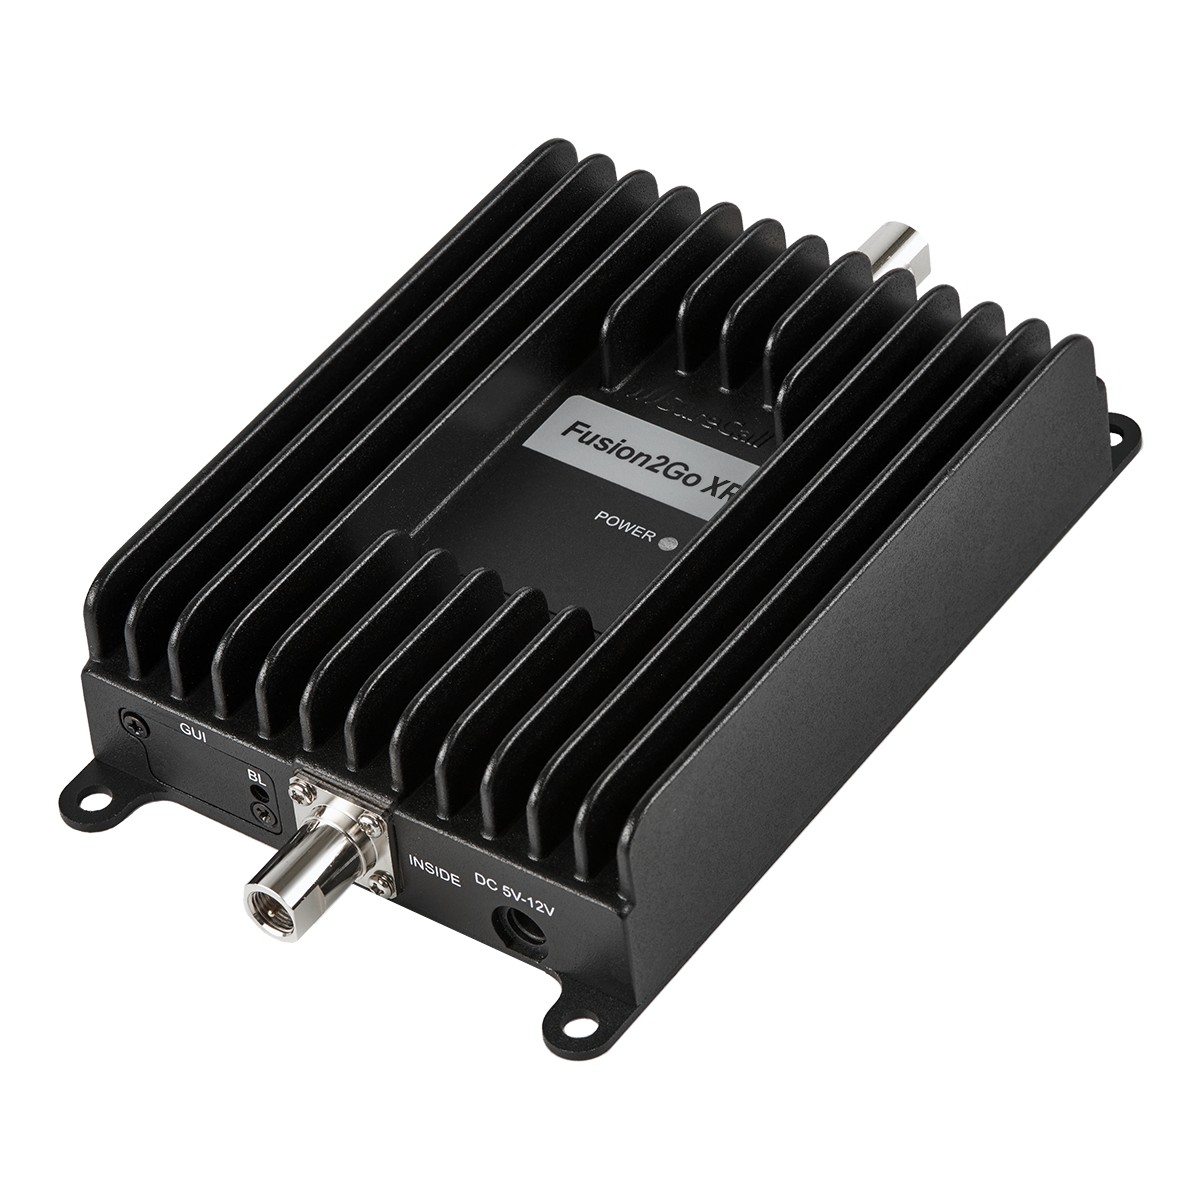 Fusion2Go XR High-Performance Signal Booster Kit